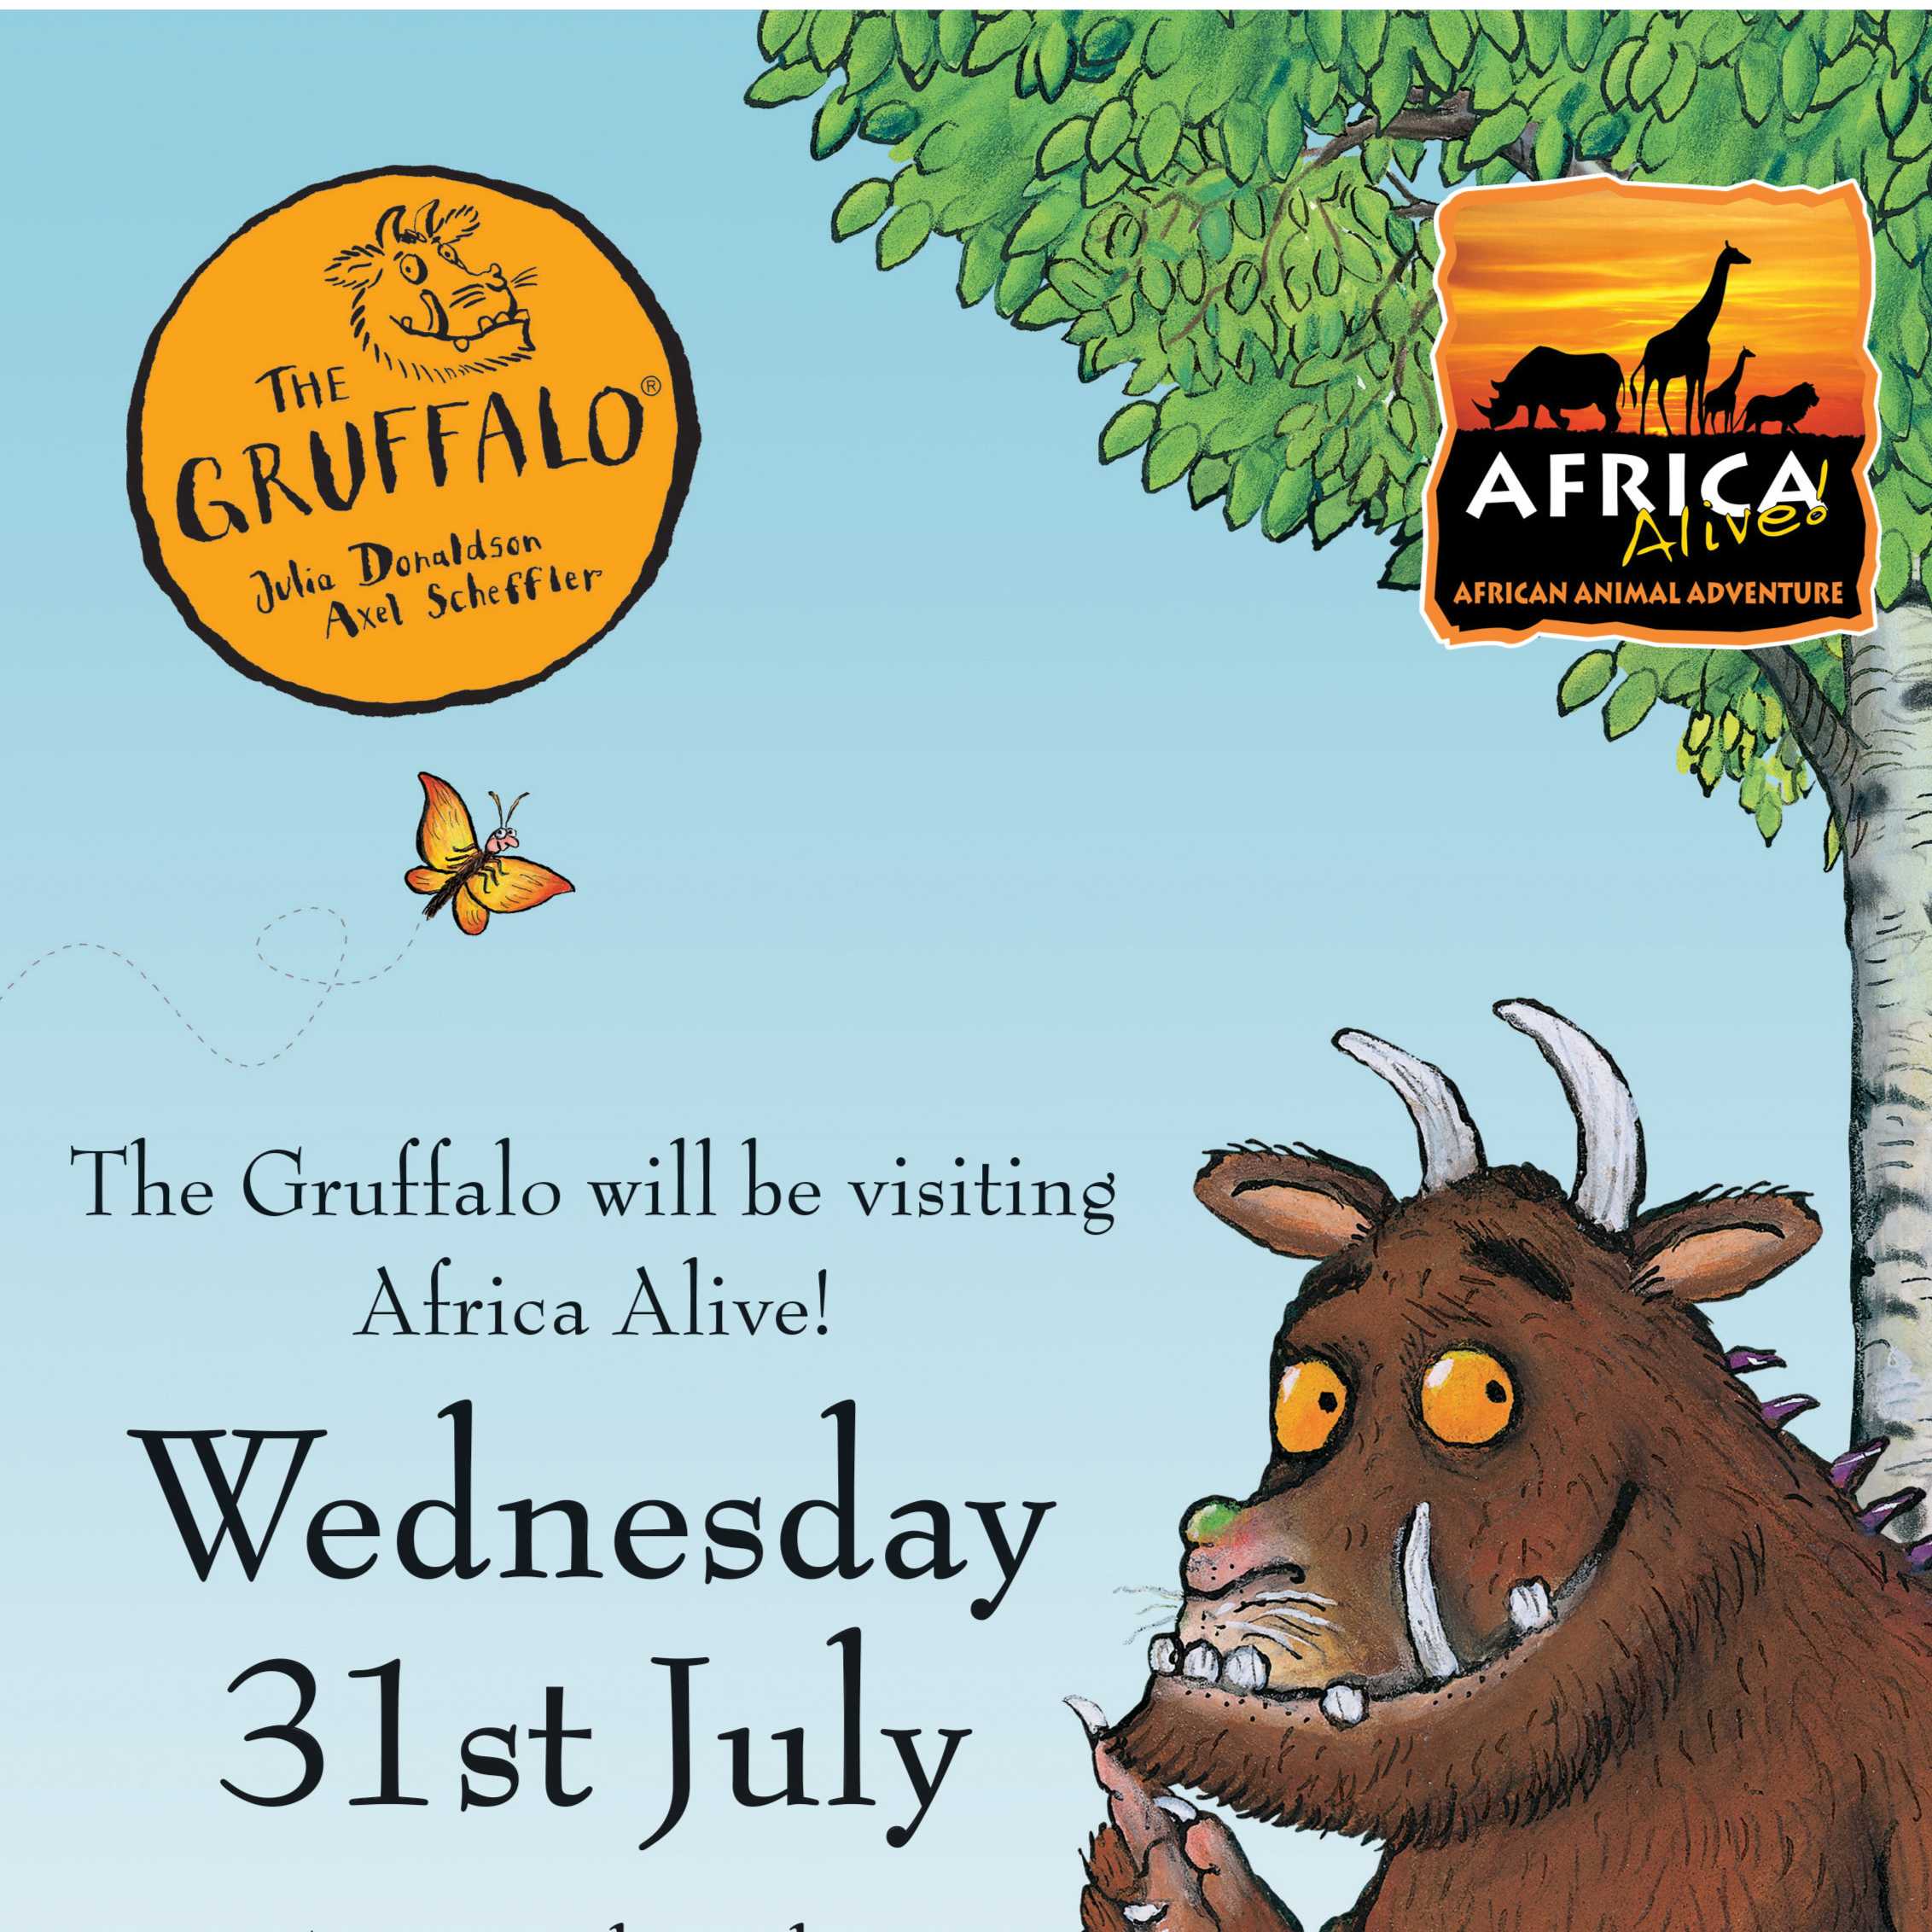 Gruffalo comes to Africa Alive! Image